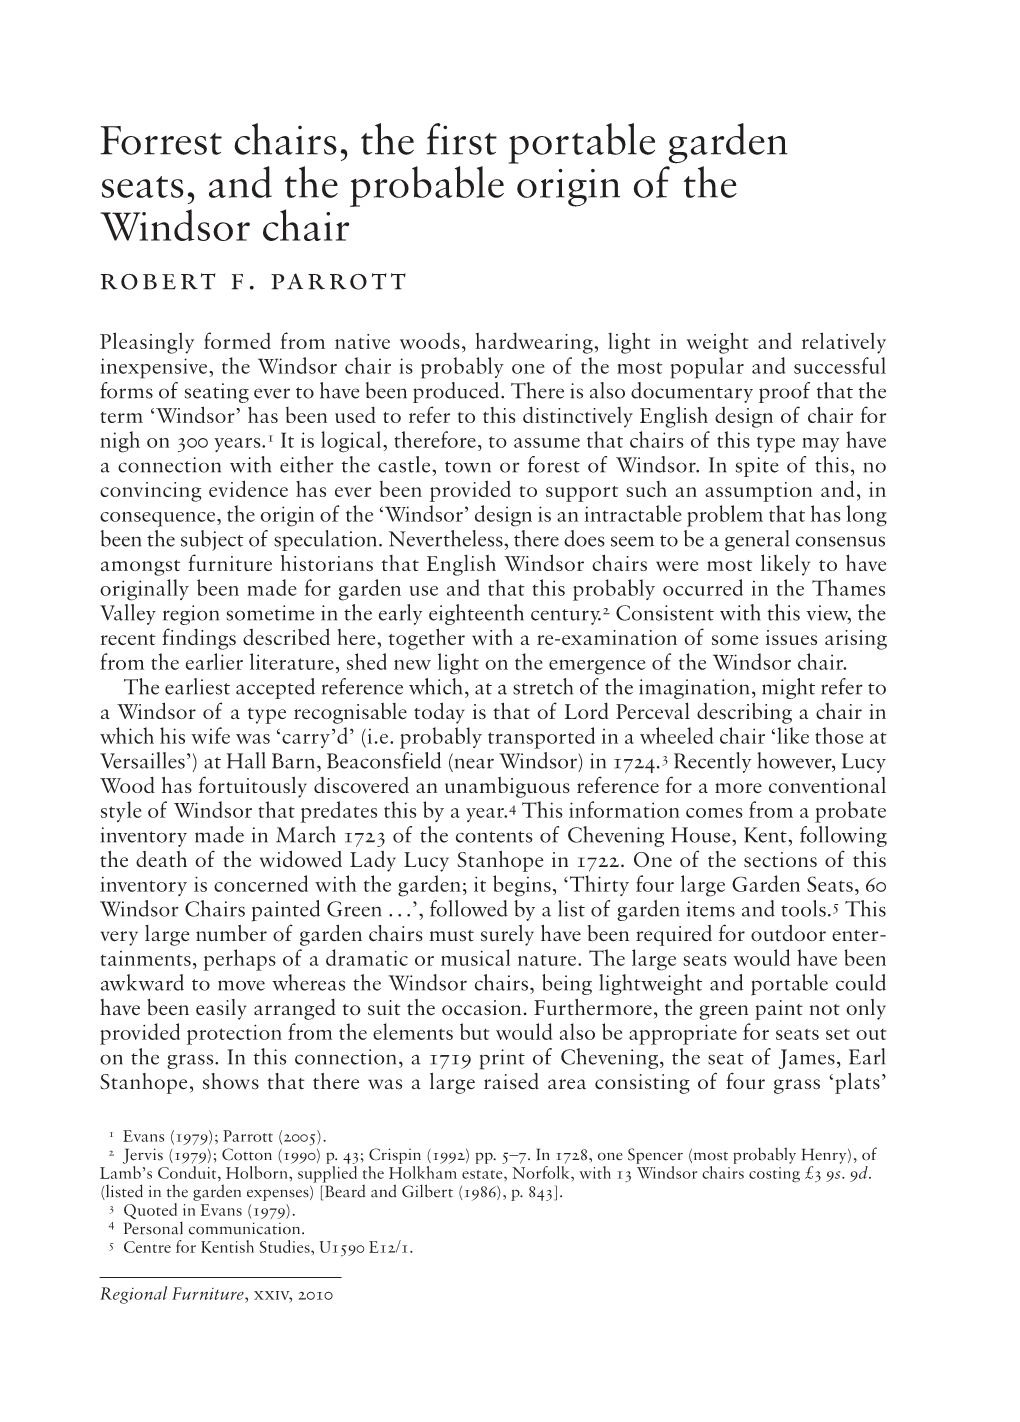 Forrest Chairs, the First Portable Garden Seats, and the Probable Origin of the Windsor Chair Robert F